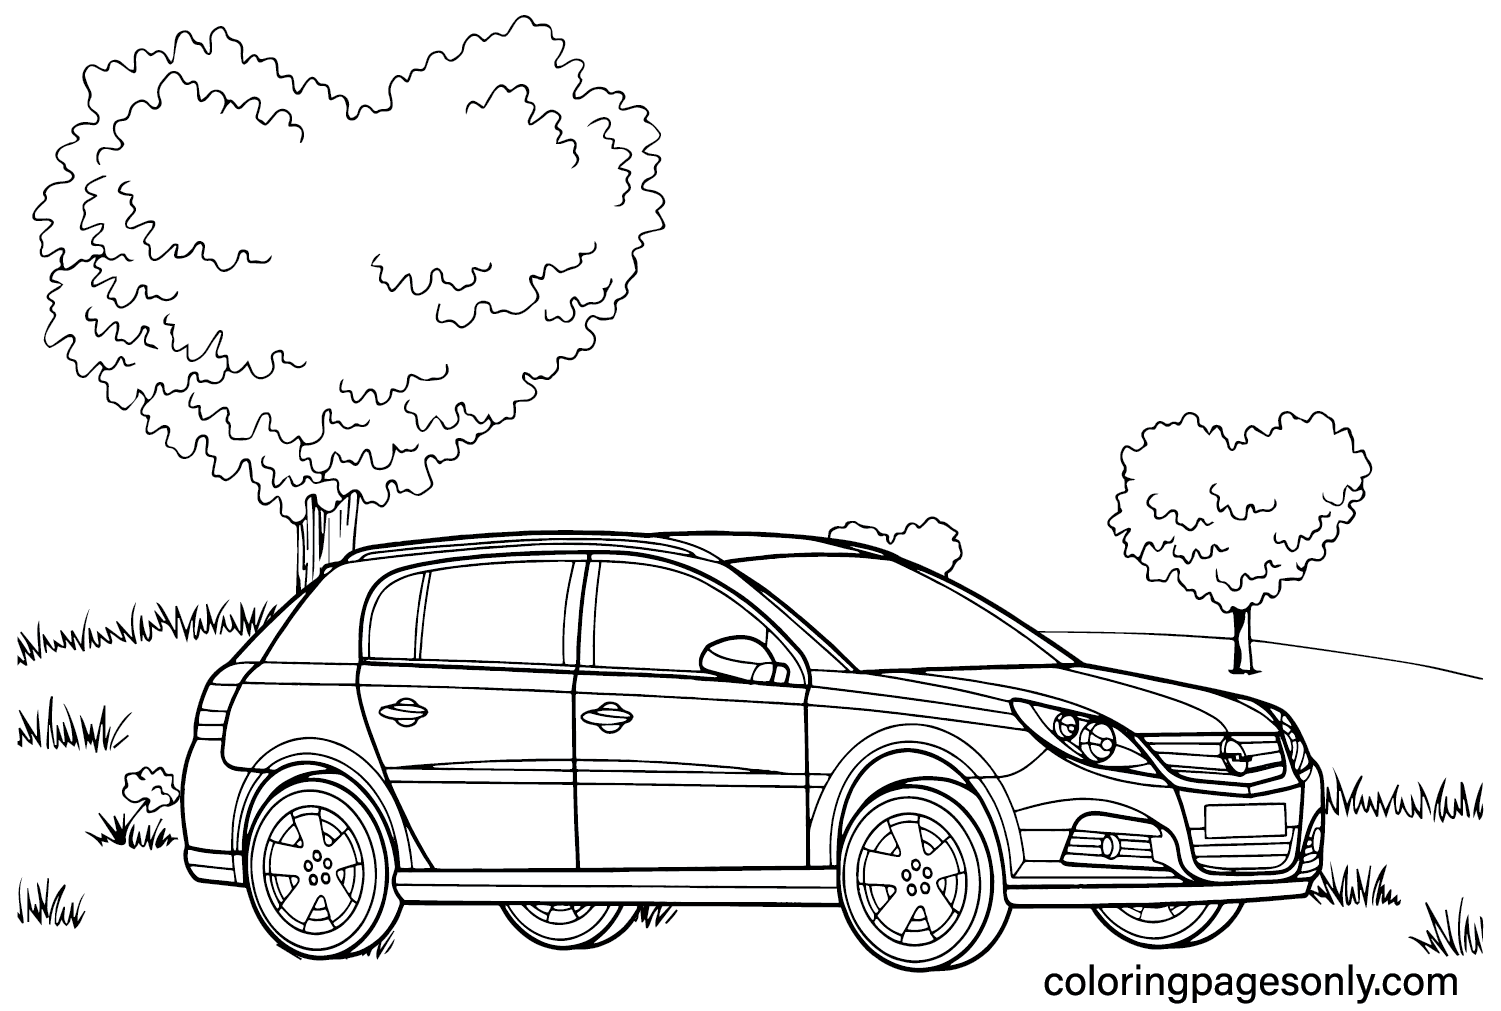 Opel Signum Coloring Page - Free Printable Coloring Pages